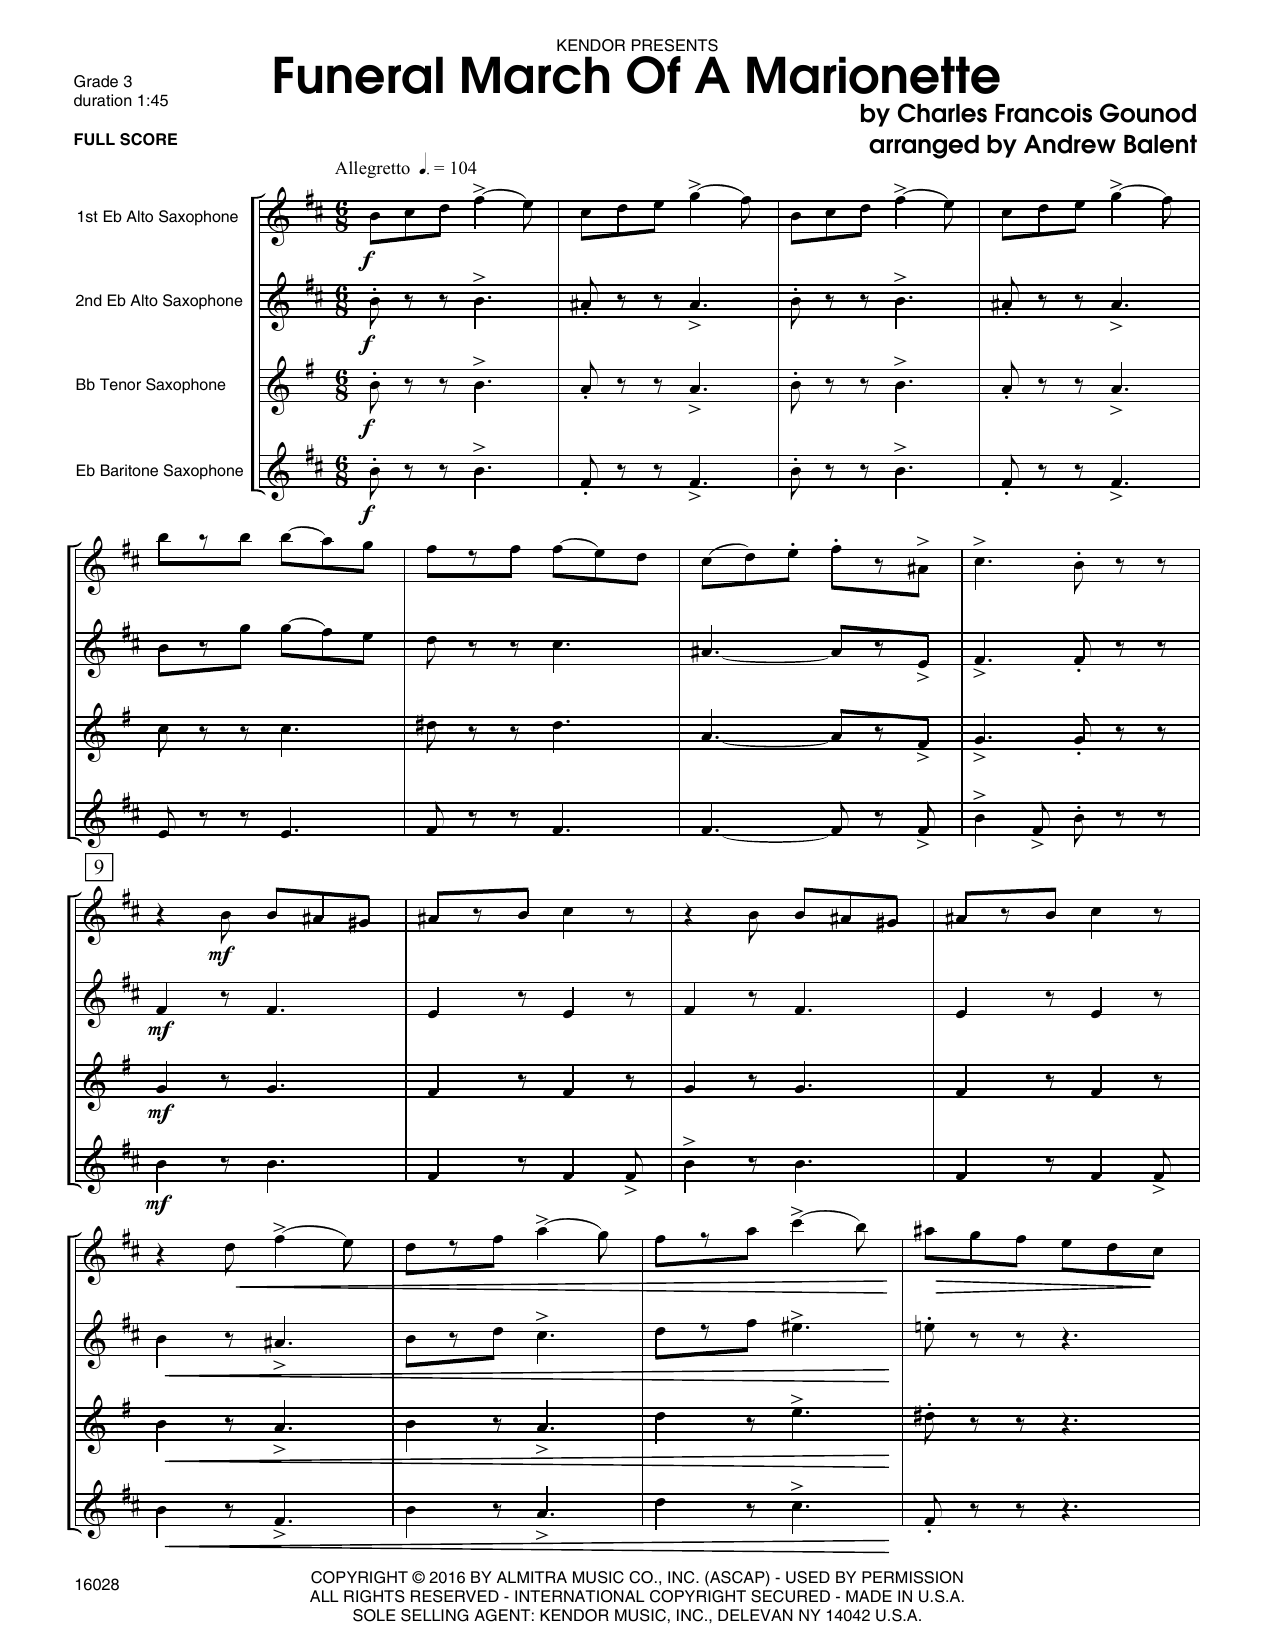 Download Balent Funeral March Of A Marionette - Full Sc Sheet Music